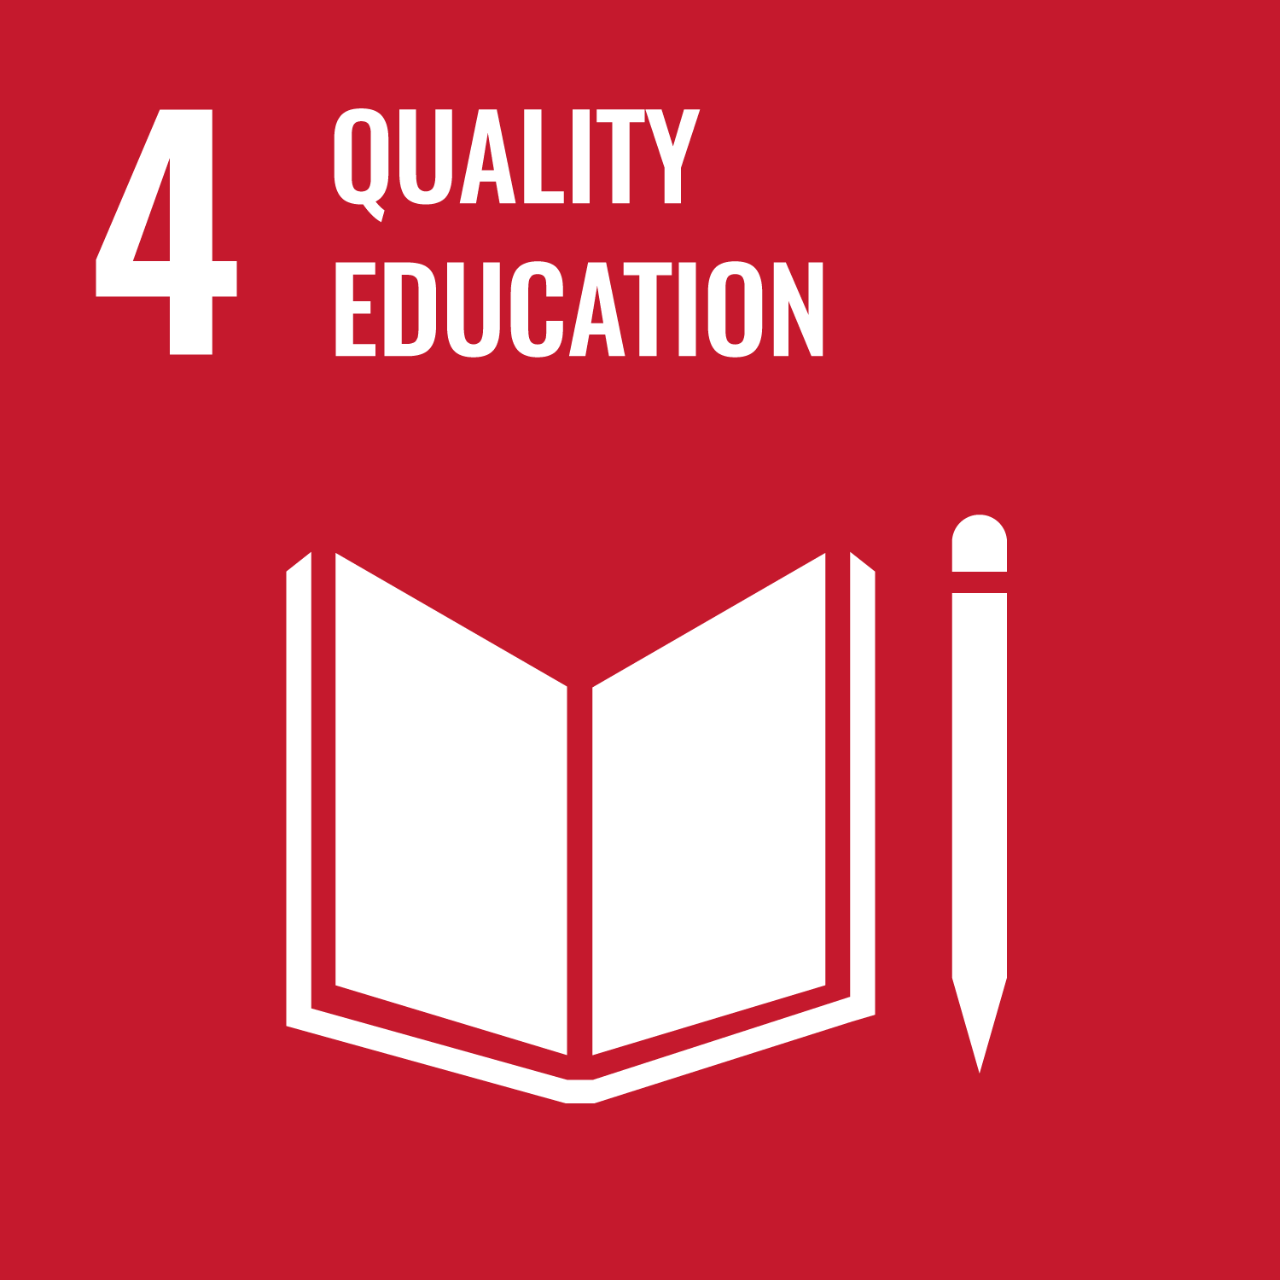 Red icon with graphic of book and pencil to represent UNSDG Goal 4: Quality Education.